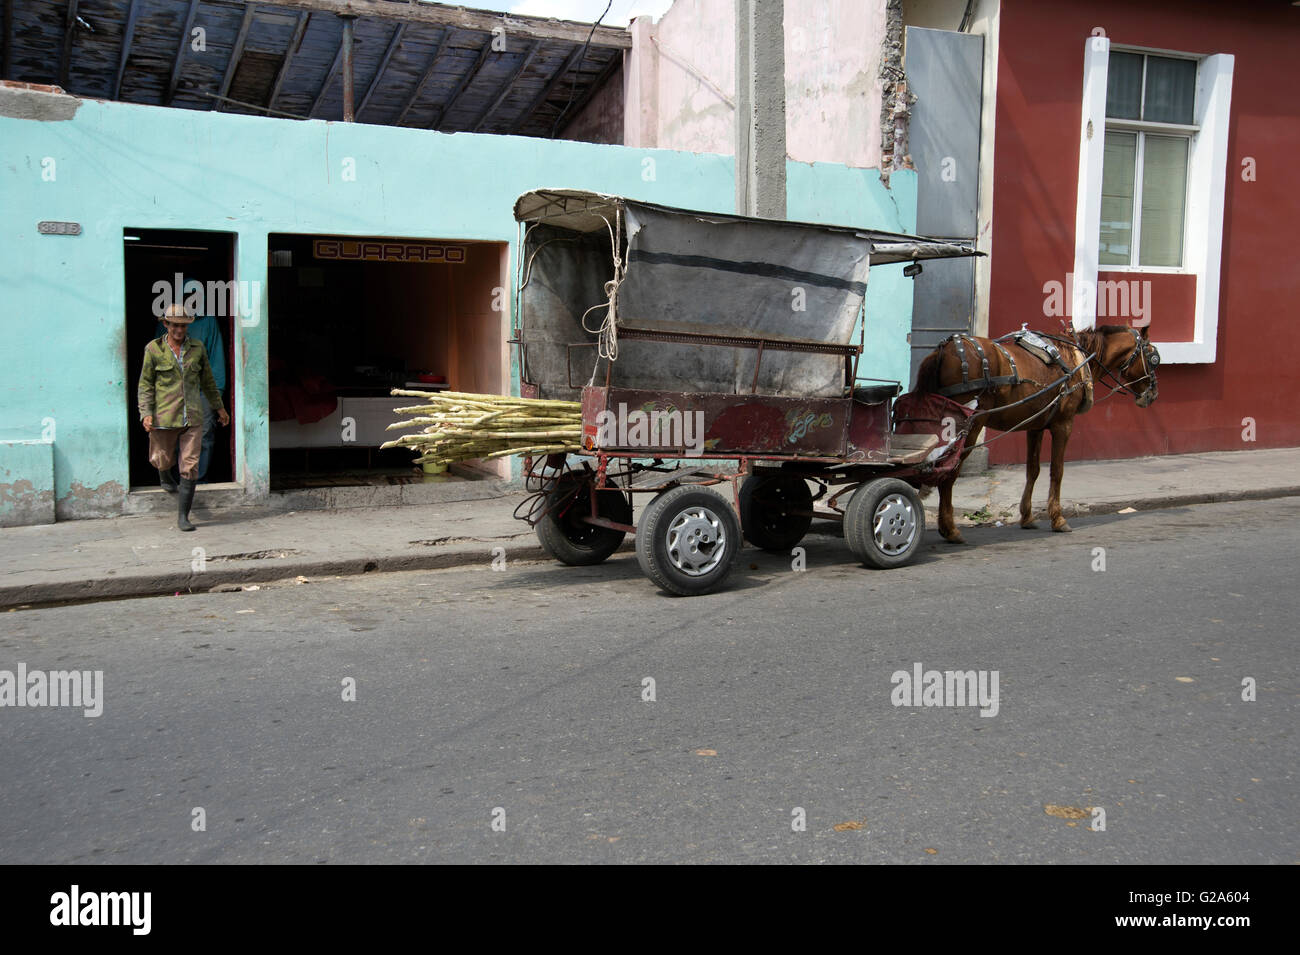 Two men offload some long raw sugarcanes from a horse drawn cart in Cienfuegos Cuba Stock Photo